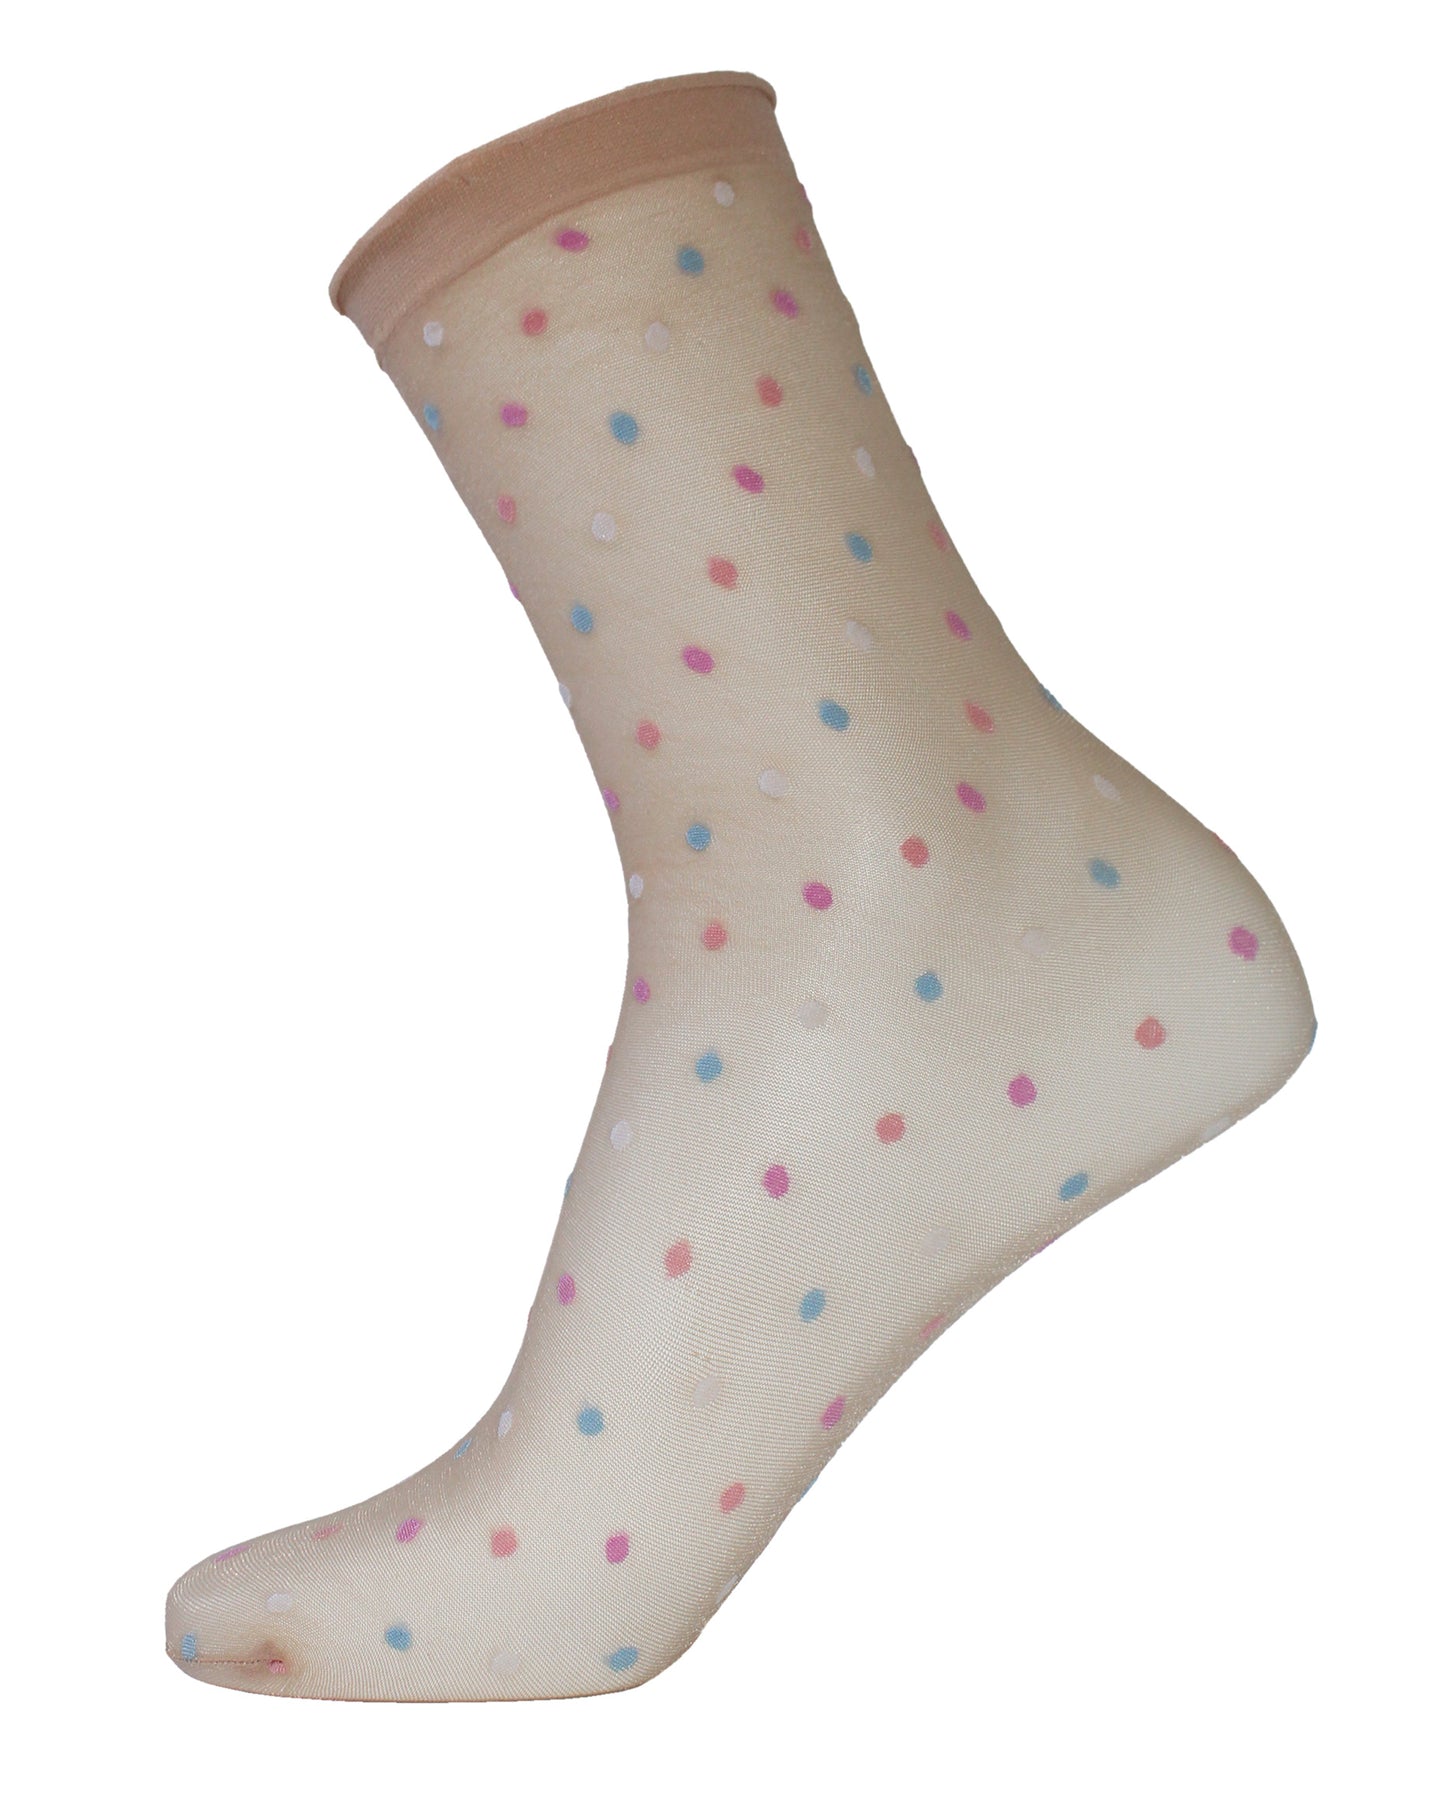 SiSi Multicolor Dot Calzino - Sheer nude fashion ankle socks with a colourful spot pattern in pink, blue, peach and white and plain cuff.